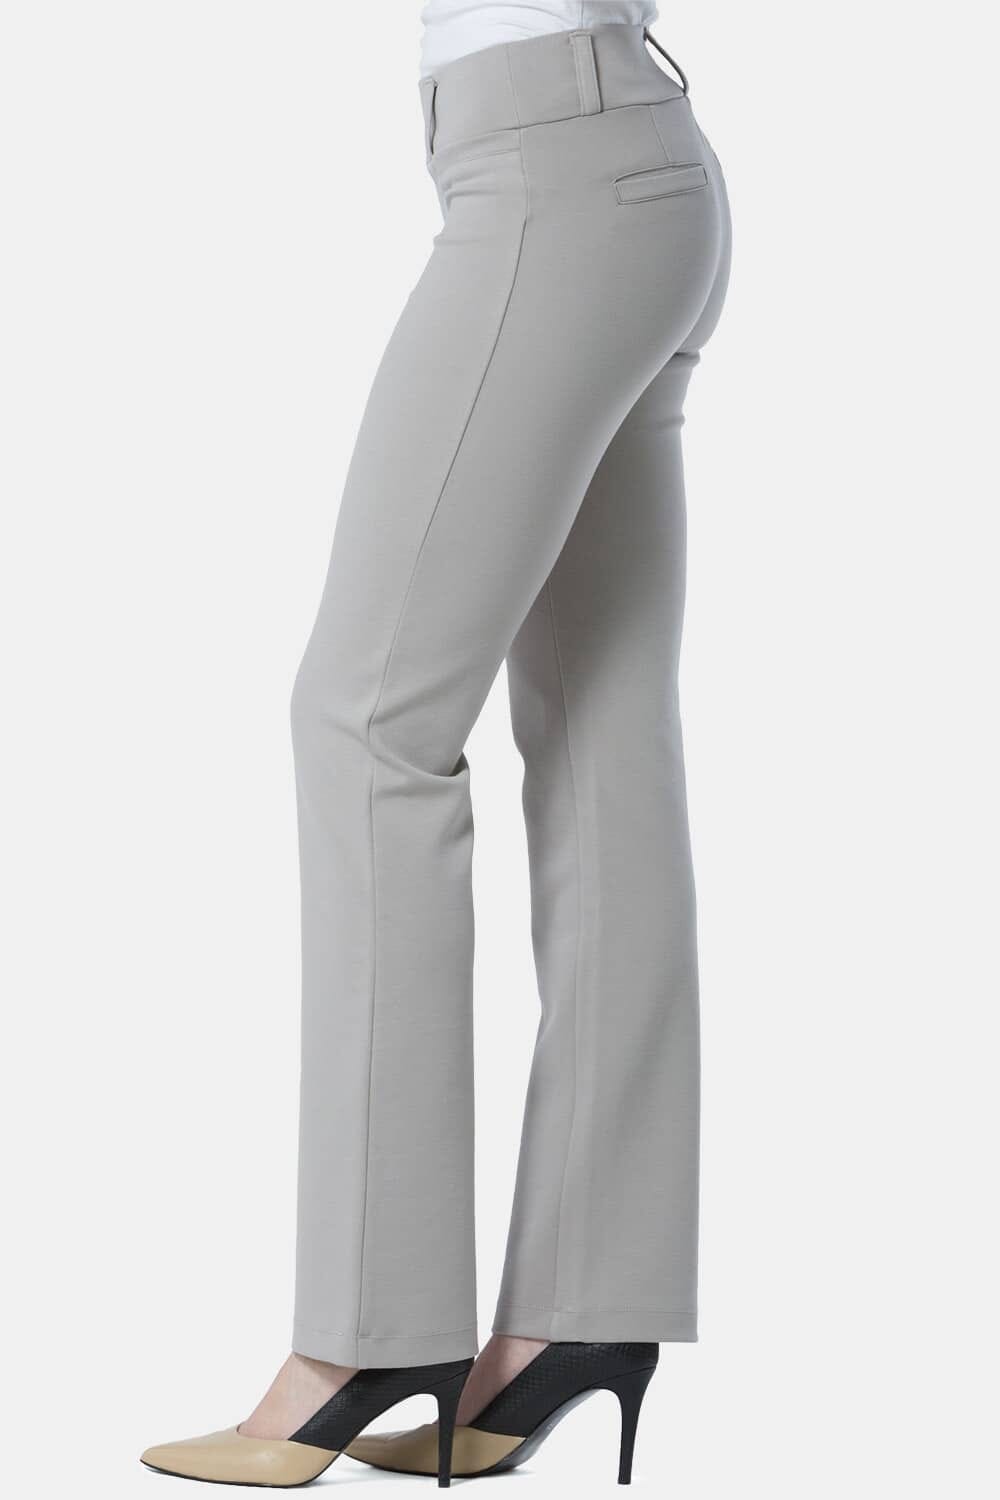 Women's Ponte Knit Pull-On Boot Leg Work Pant - NEW & IMPROVED FIT Womens>Pants Fishers Finery 